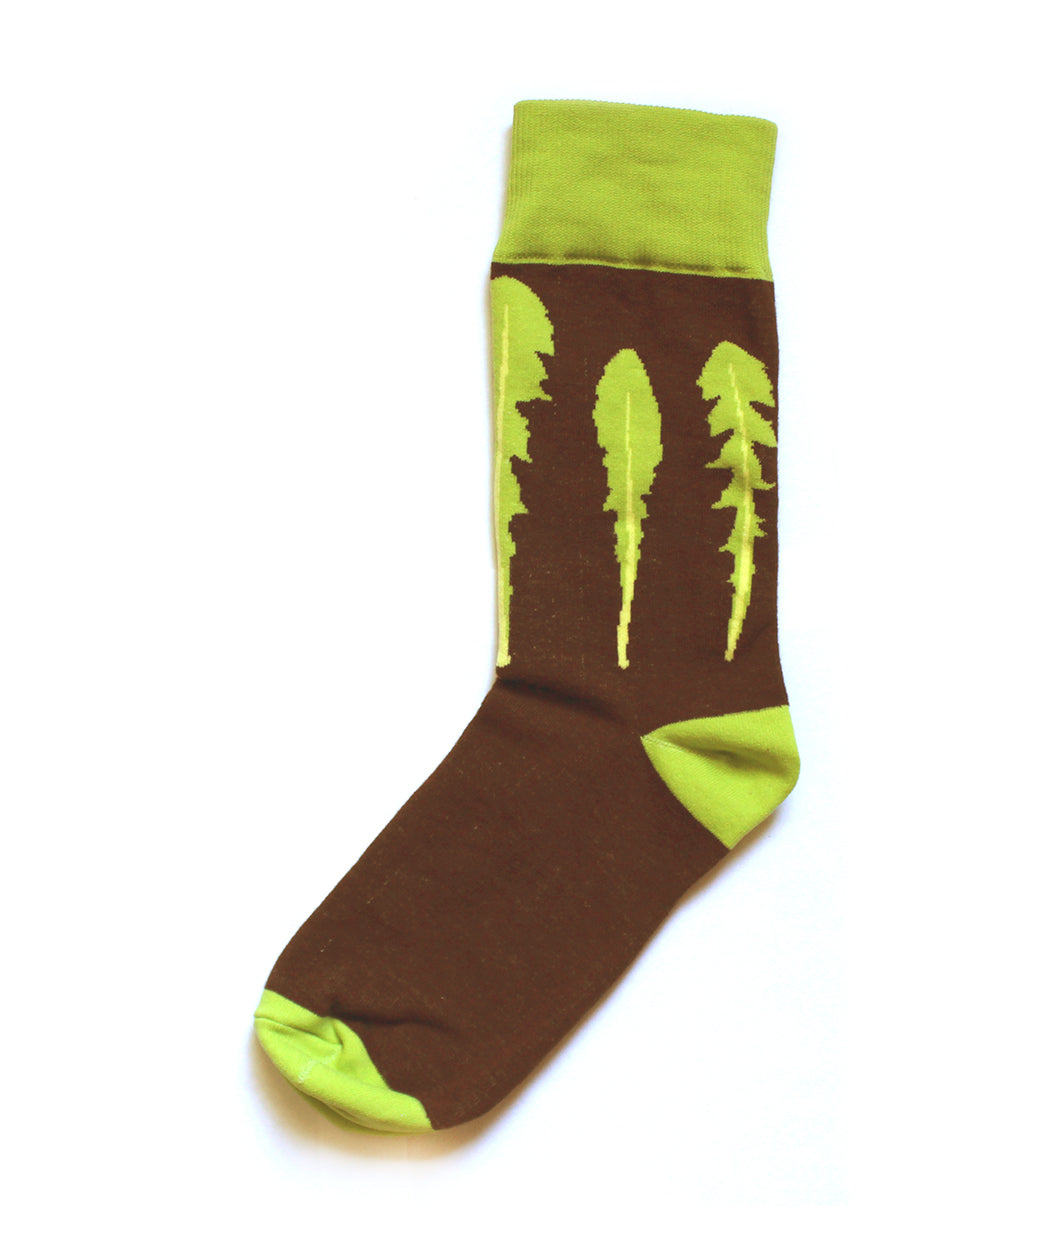 Brown sock with a green ankle, heel, and toe with three green leaves - from This Star Won’t Go Out